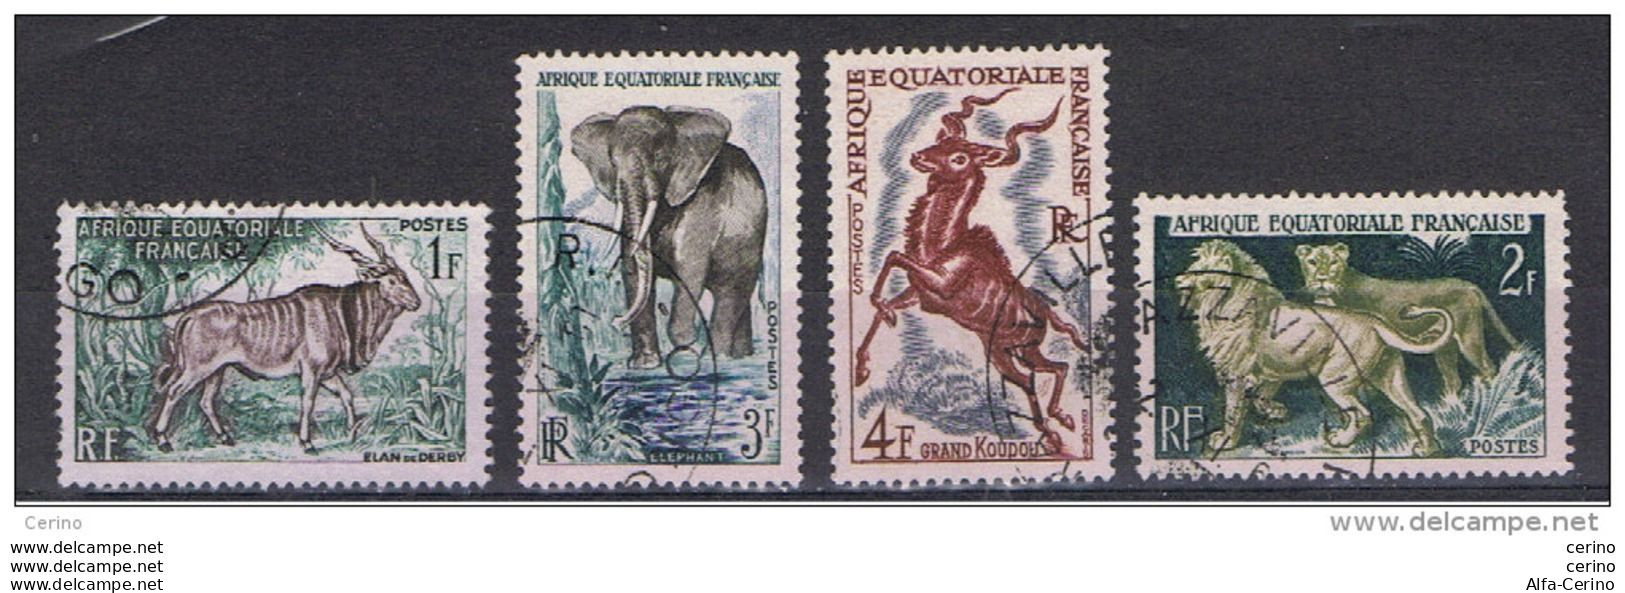 AFR..EQUATORIALE  FRANCESE:  1957  FAUNA  AFRICANA  -  S. CPL. 4  VAL. US. -  YV/TELL. 238/41 - Usados